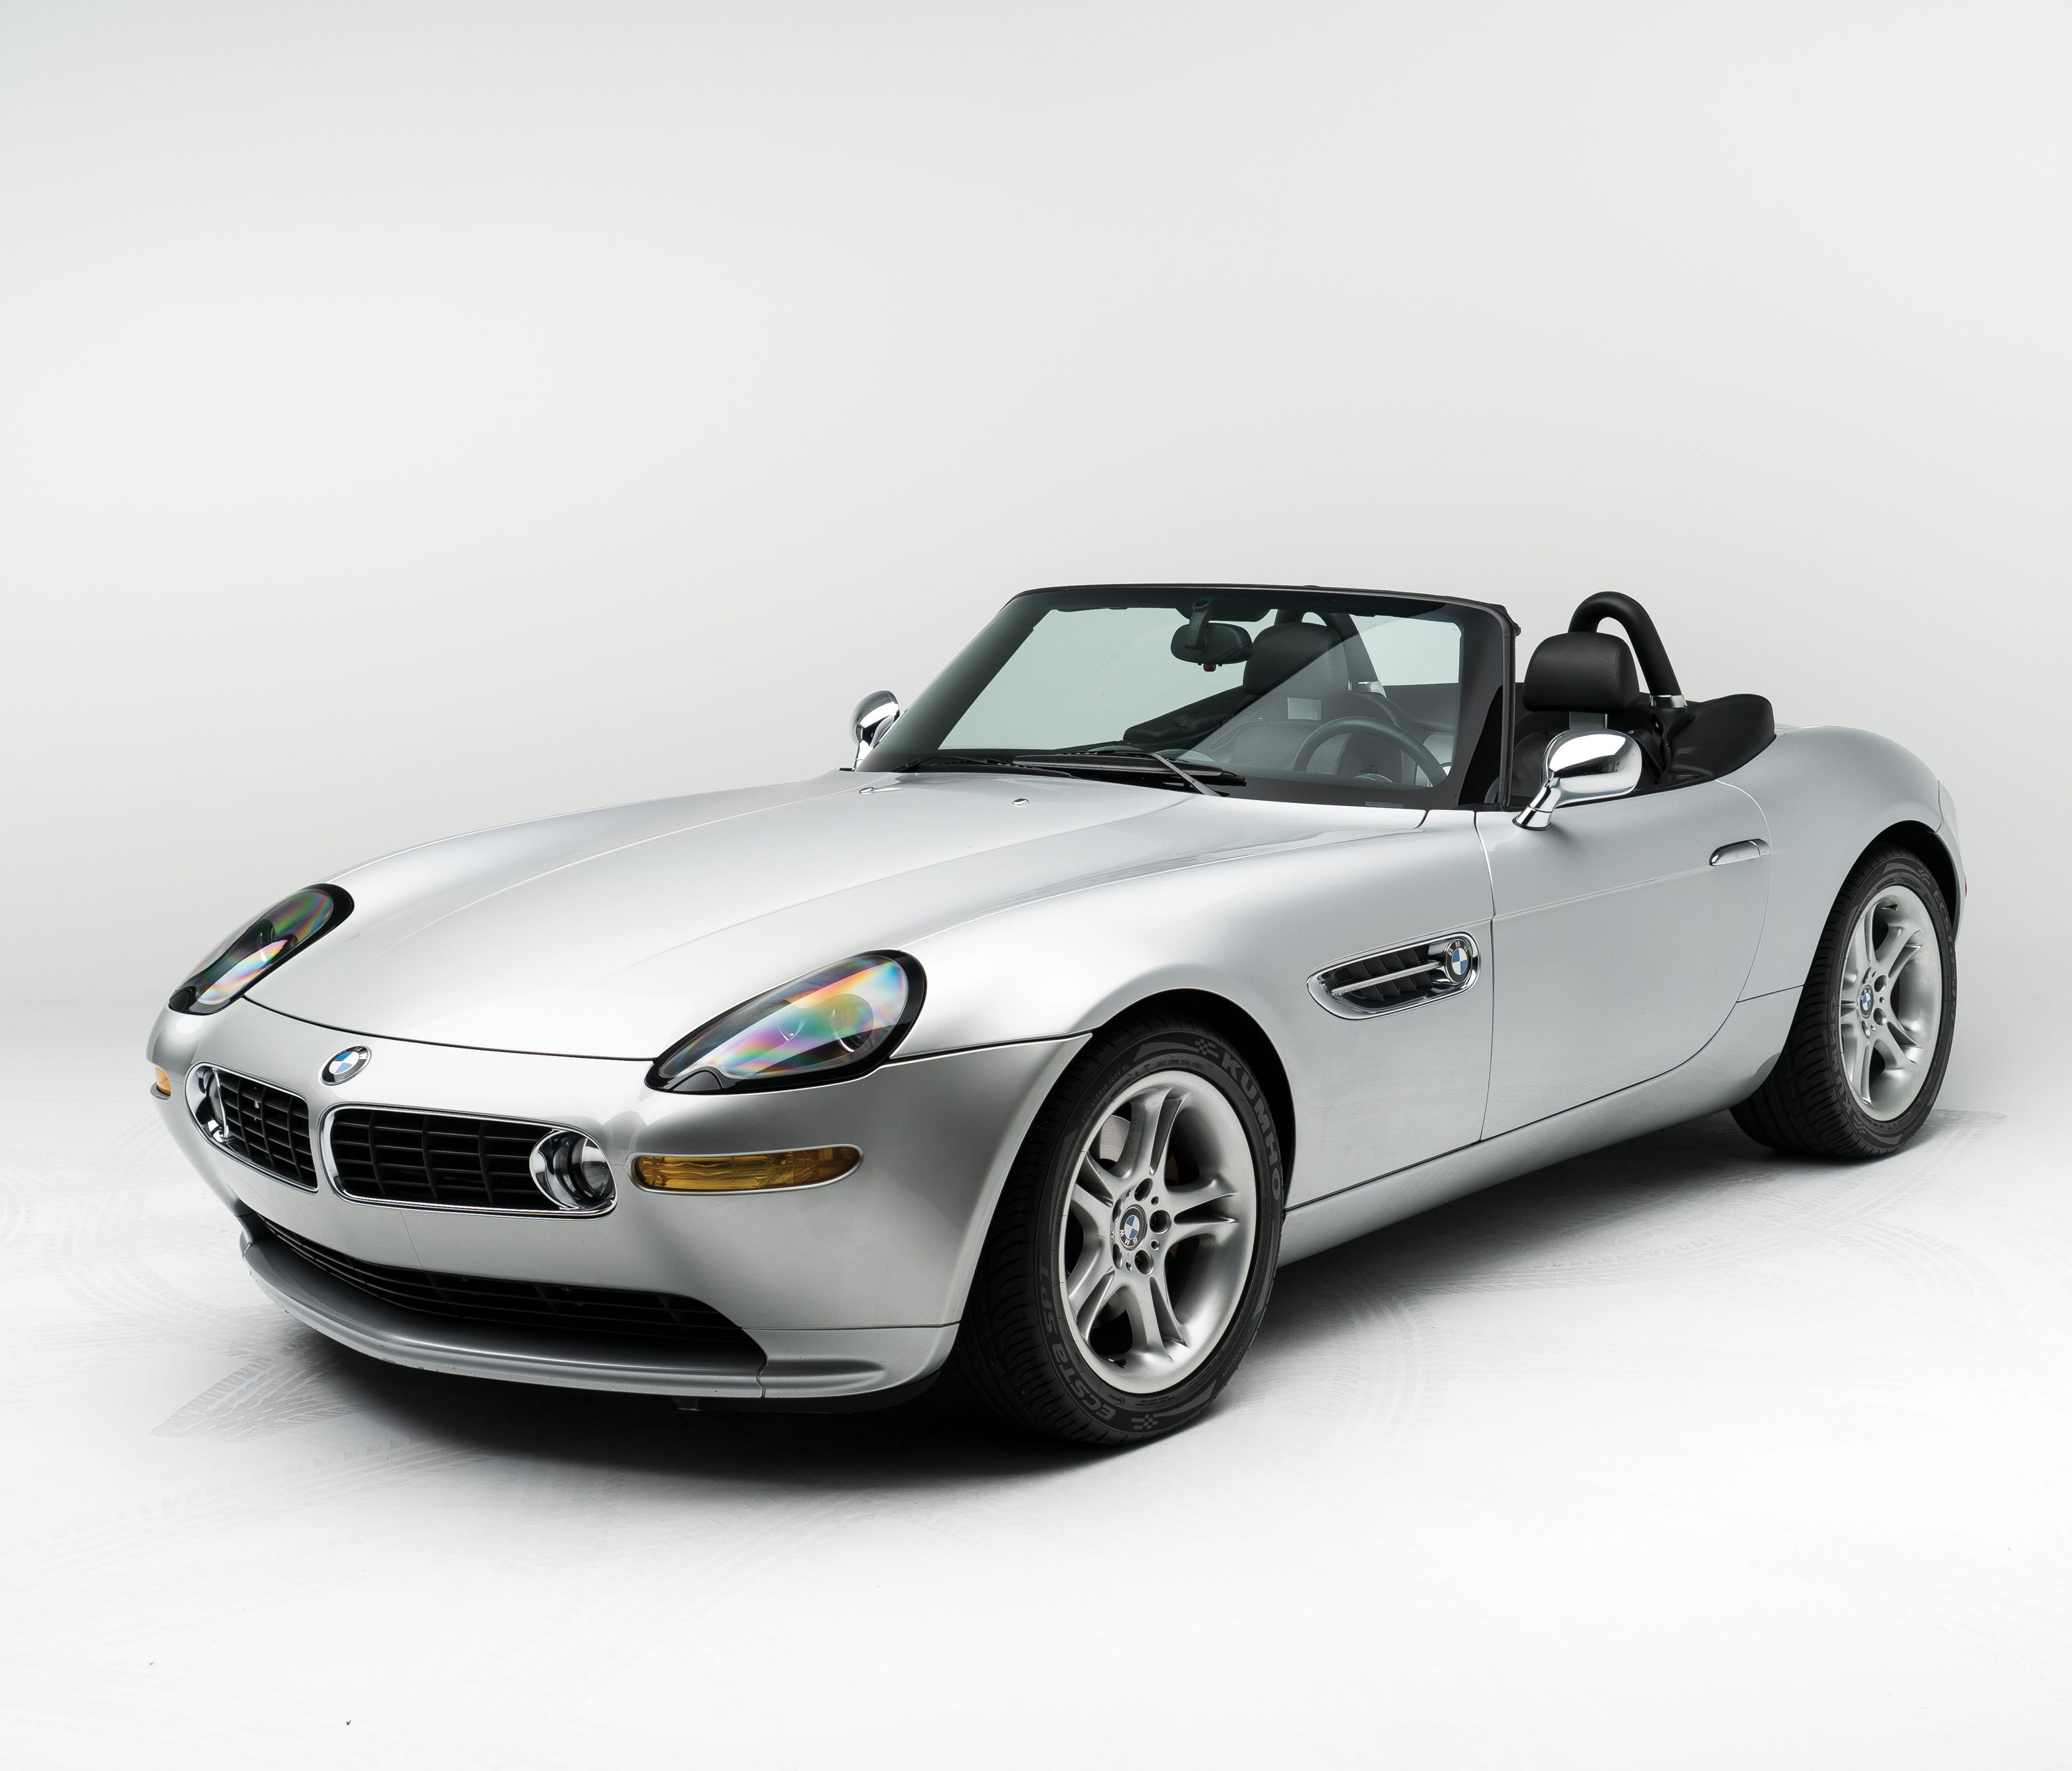 Steve Jobs bought this BMW Z8 new in 2000. It's now selling for triple its original price.